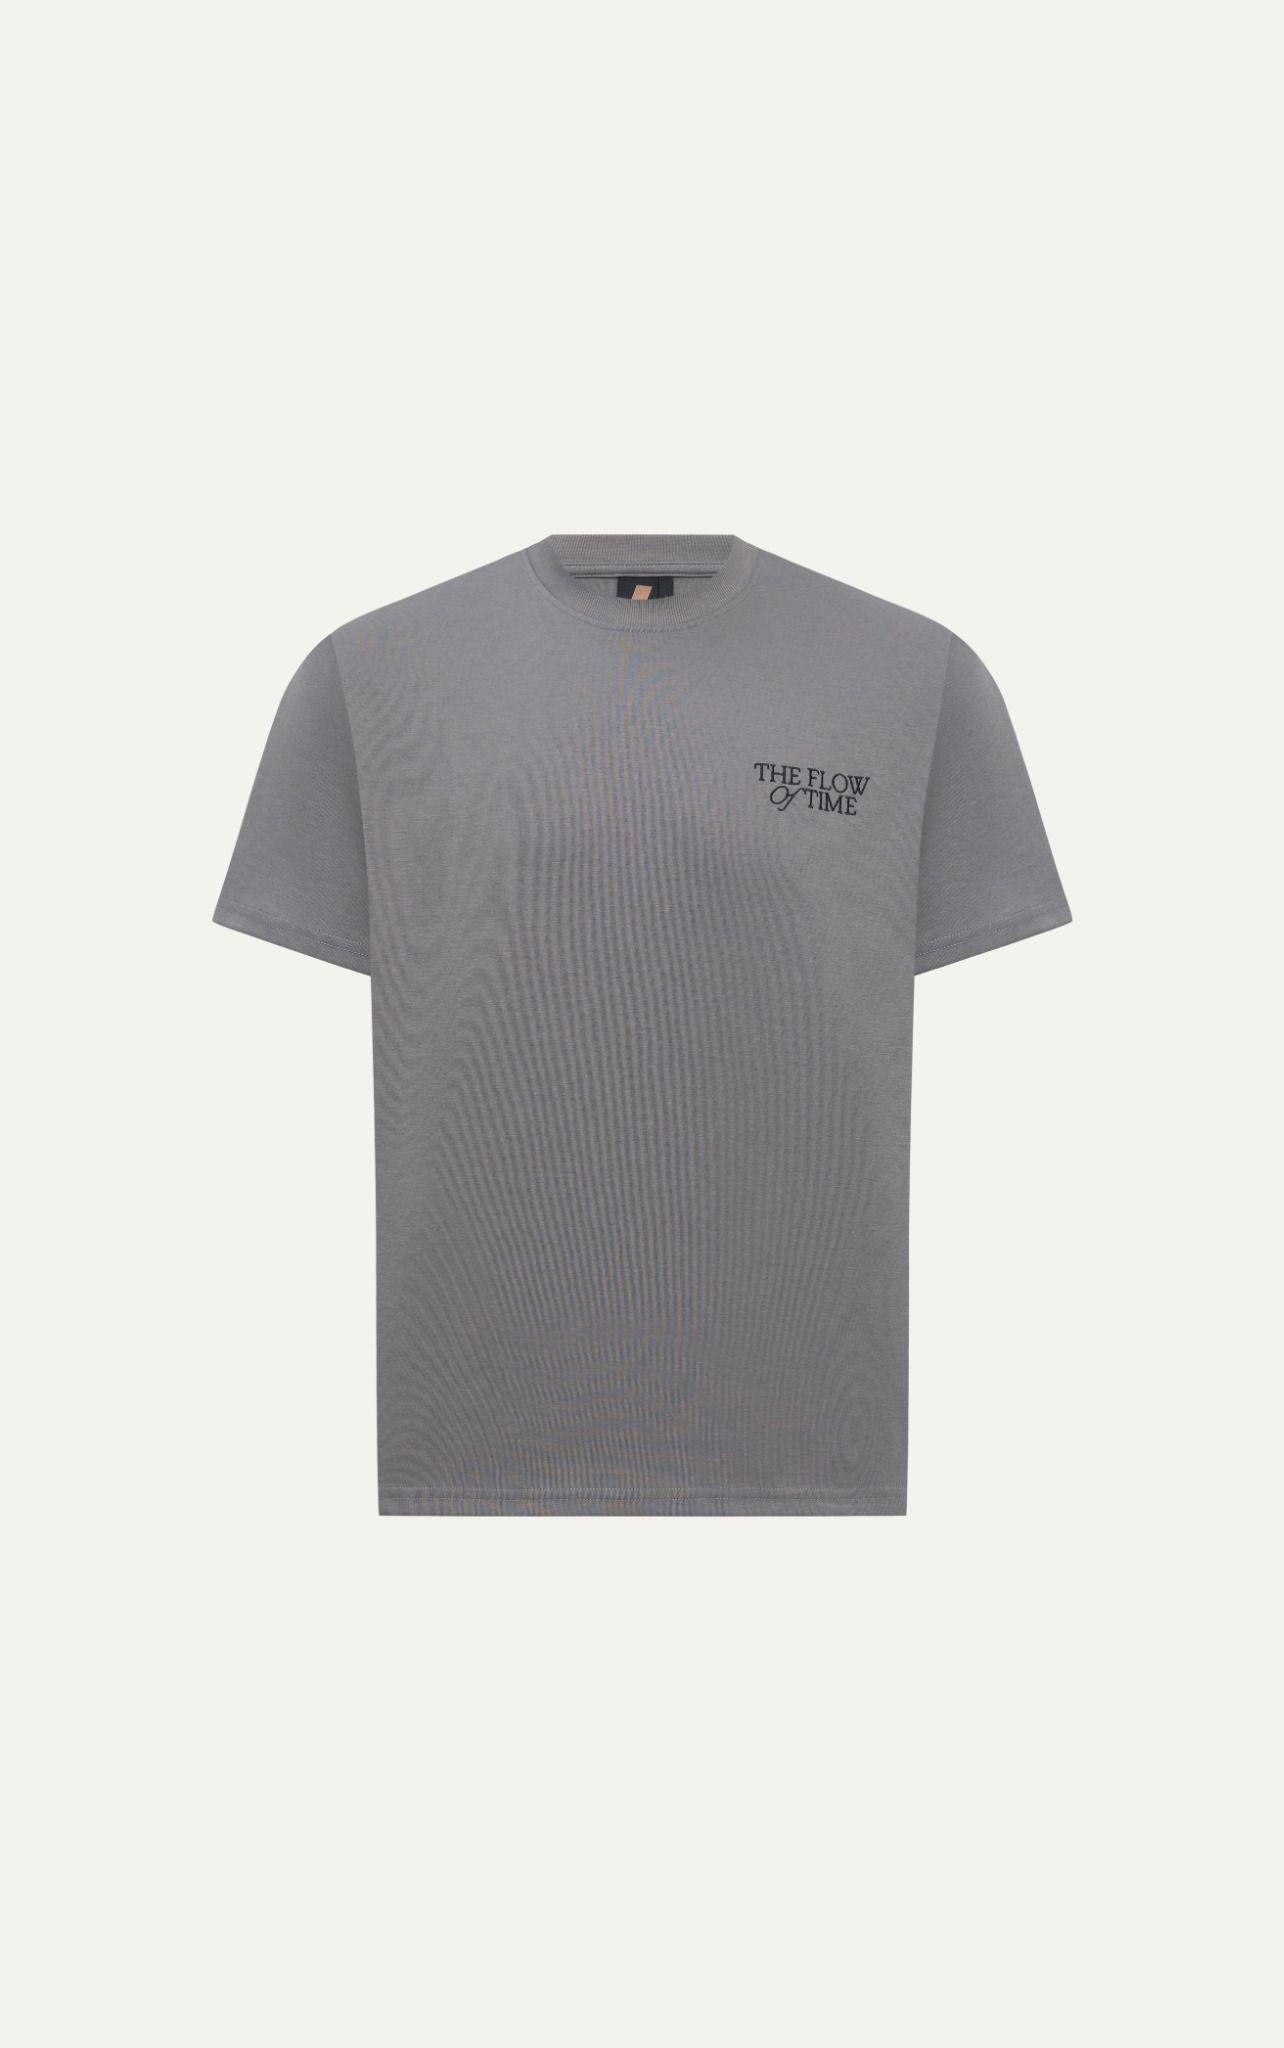  AG710 STUDIO LOOSE FIT "THE FLOW OF TIME" BASIC T-SHIRT - LIGHT GREY 